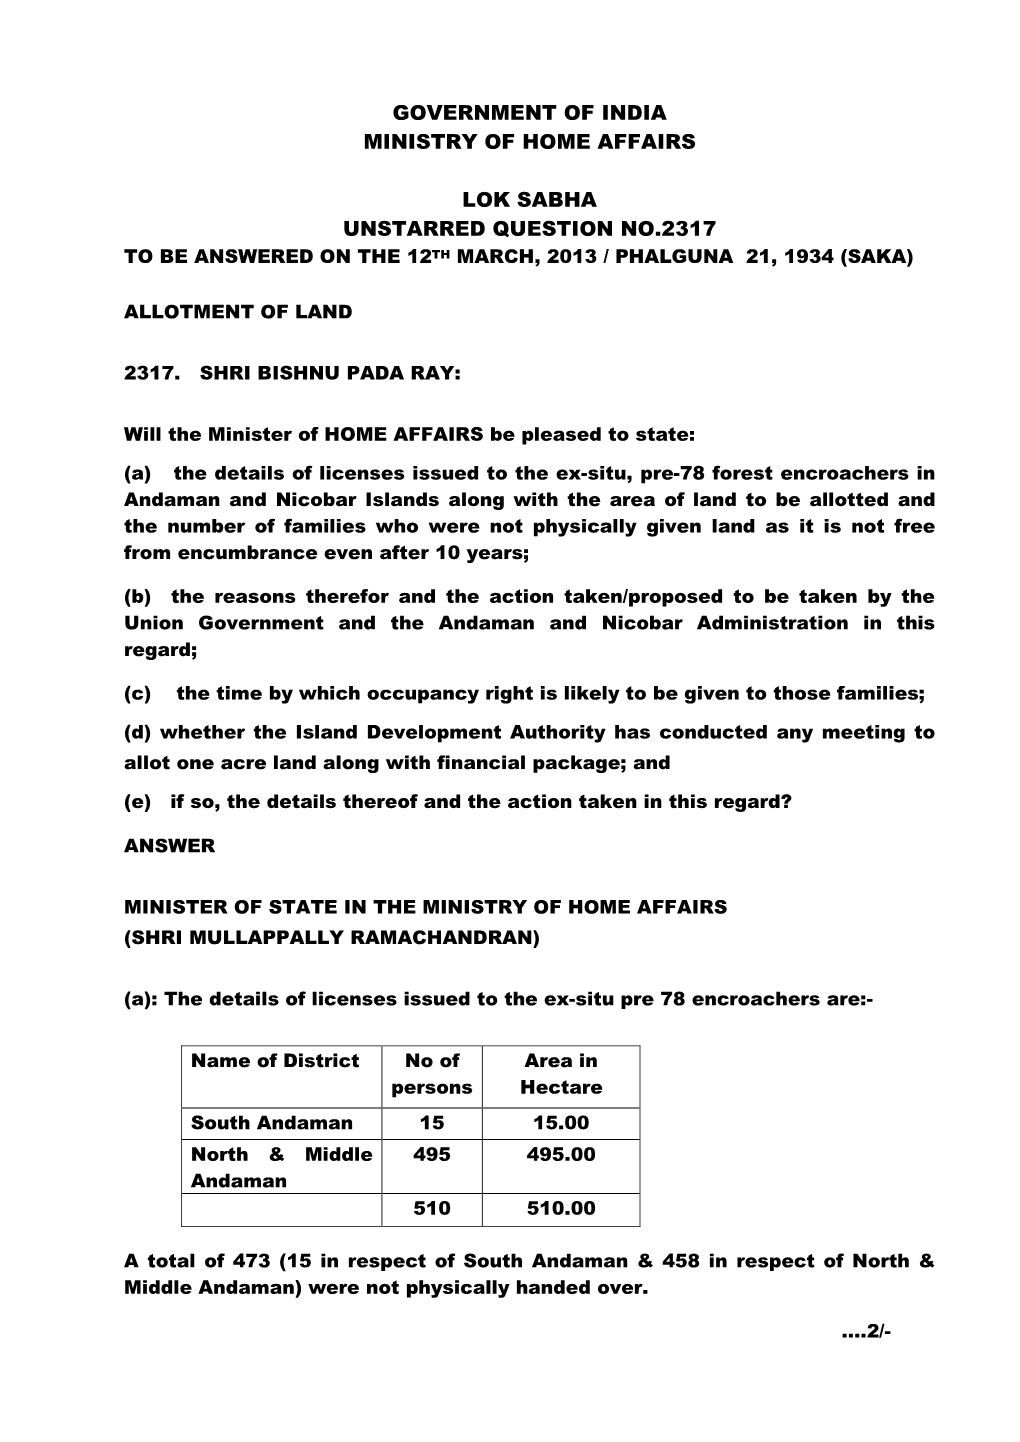 Government of India Ministry of Home Affairs Lok Sabha Unstarred Question No.2317